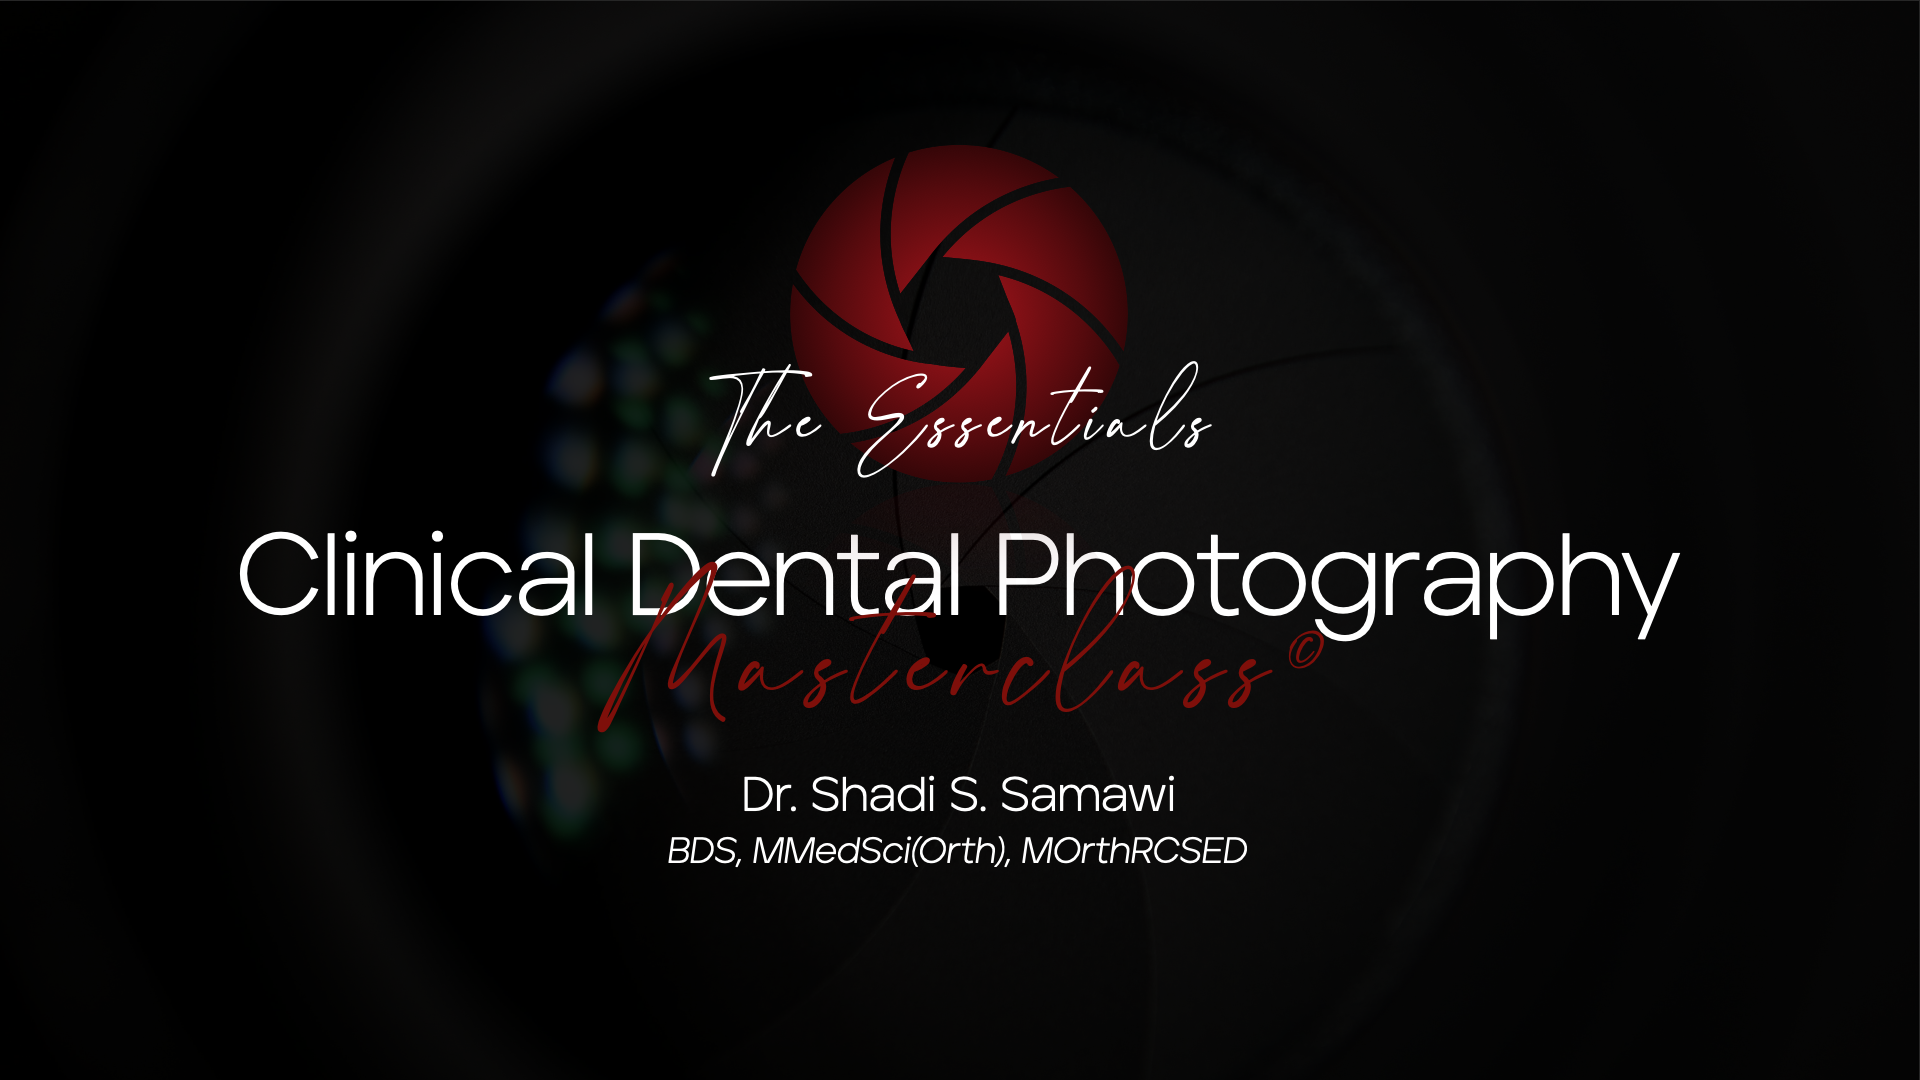 Clinical Dental Photography Masterclass :: The Essentials